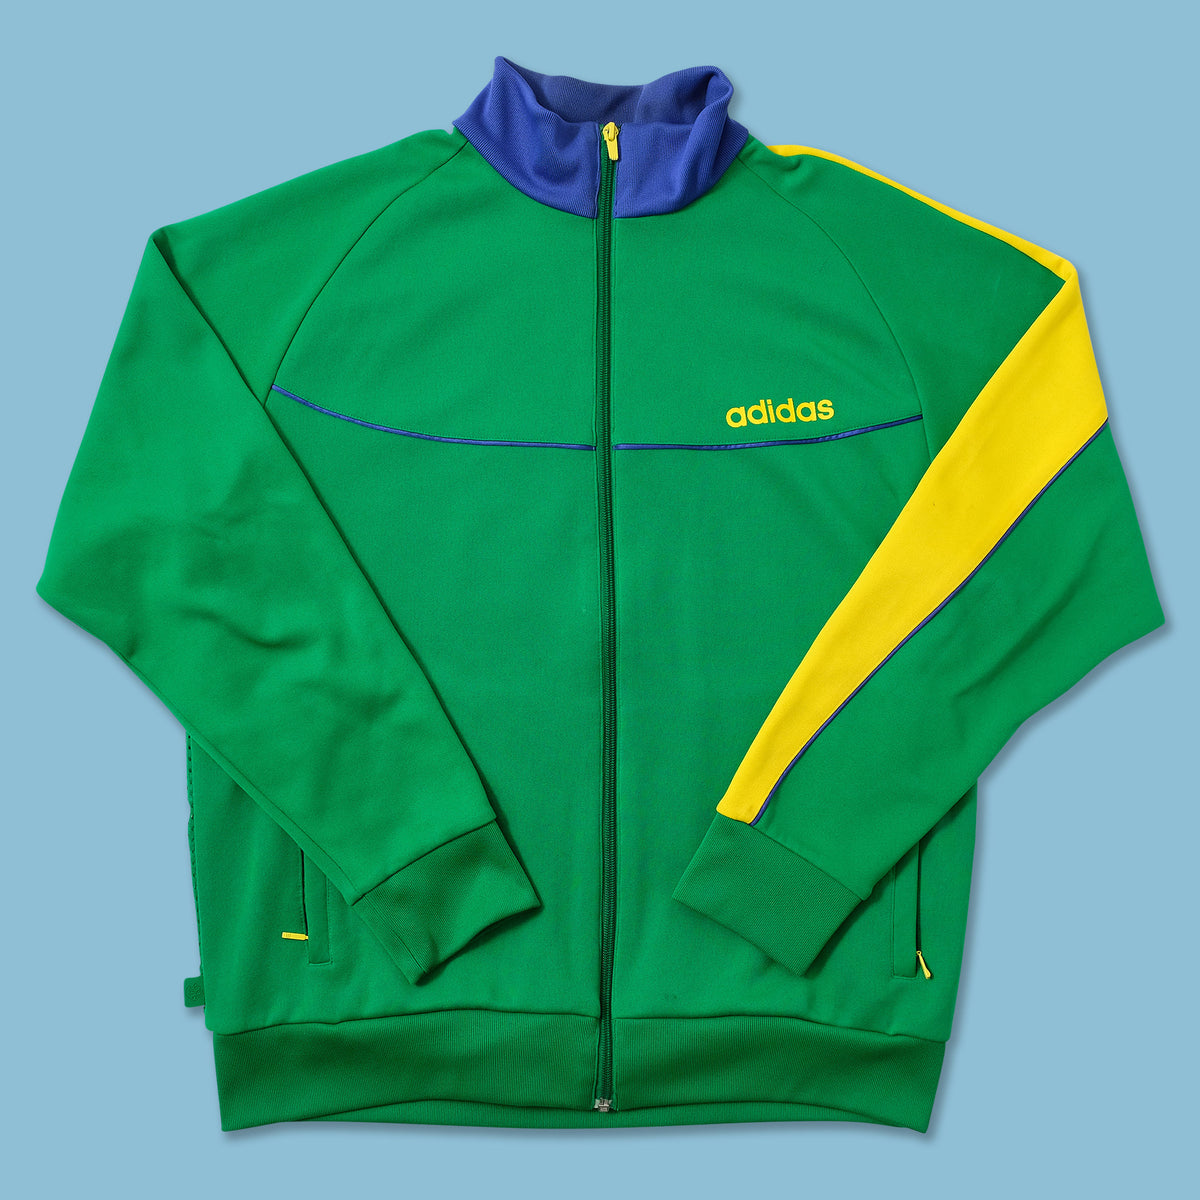 Adidas Vintage Brasil/Brazil Zip Up Jacket Green Size XS - $40 (60% Off  Retail) - From Abby